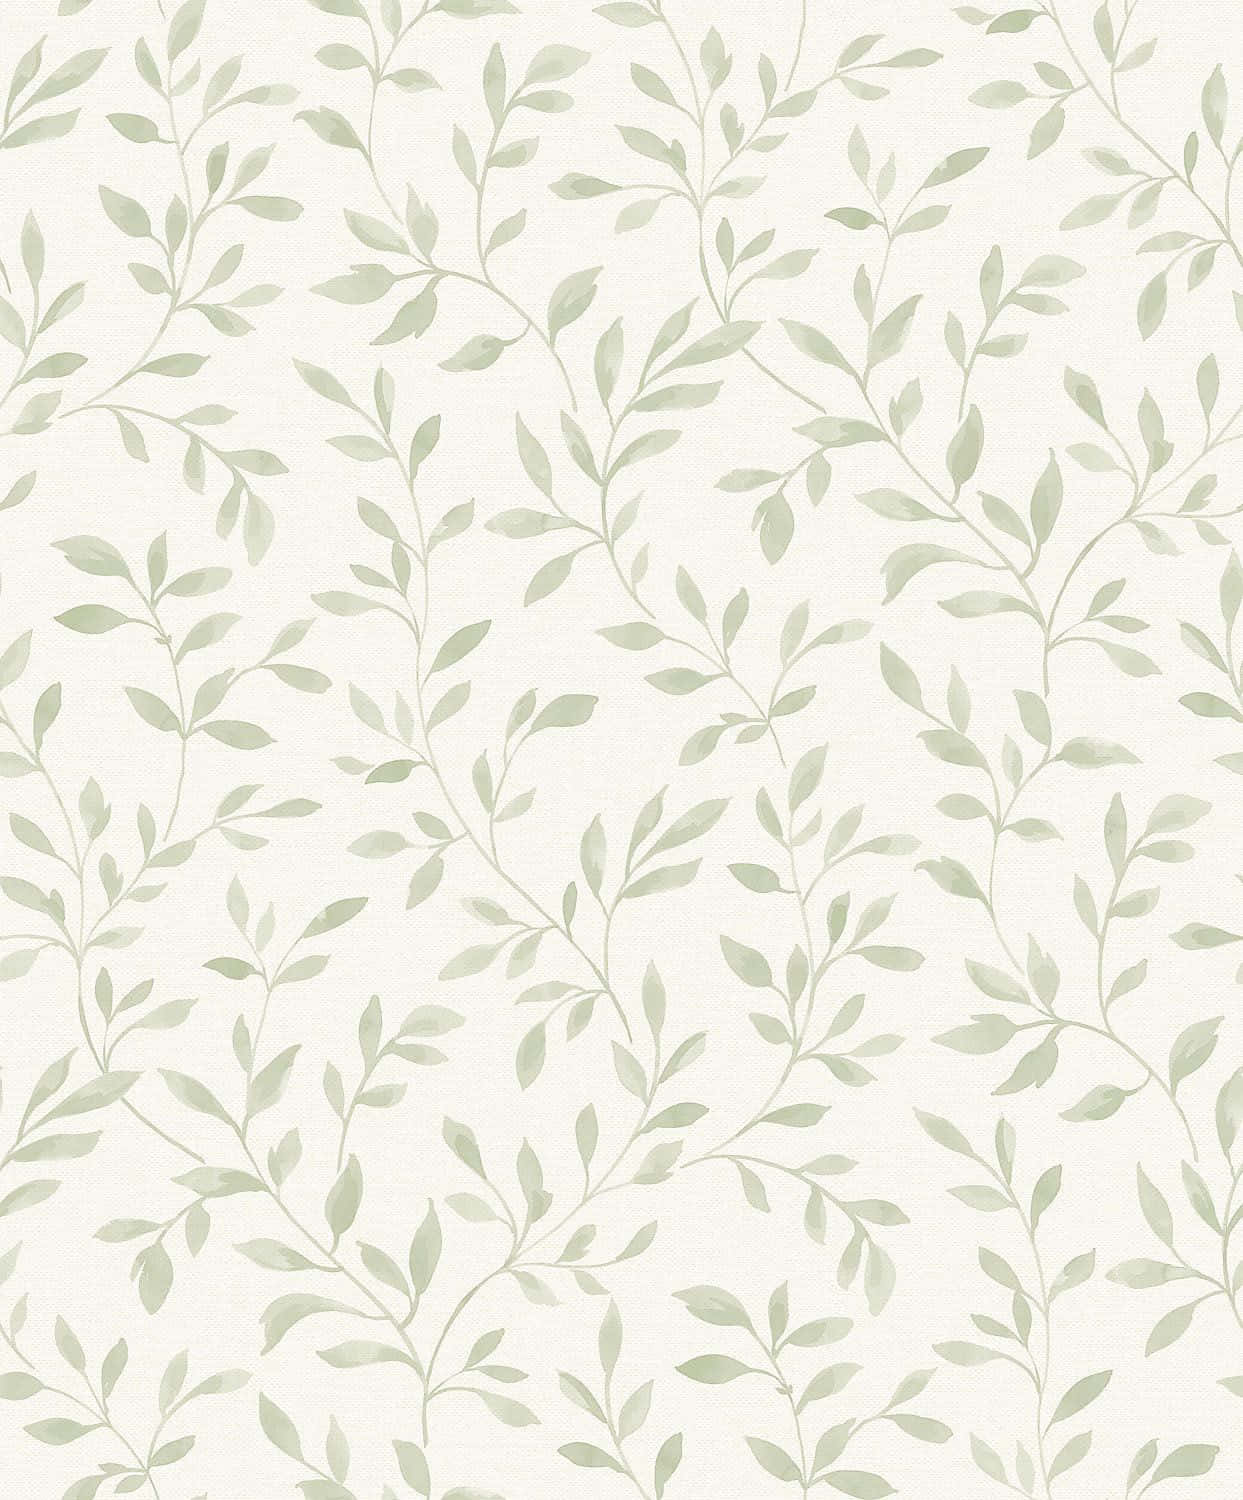 A Green And White Leaf Wallpaper